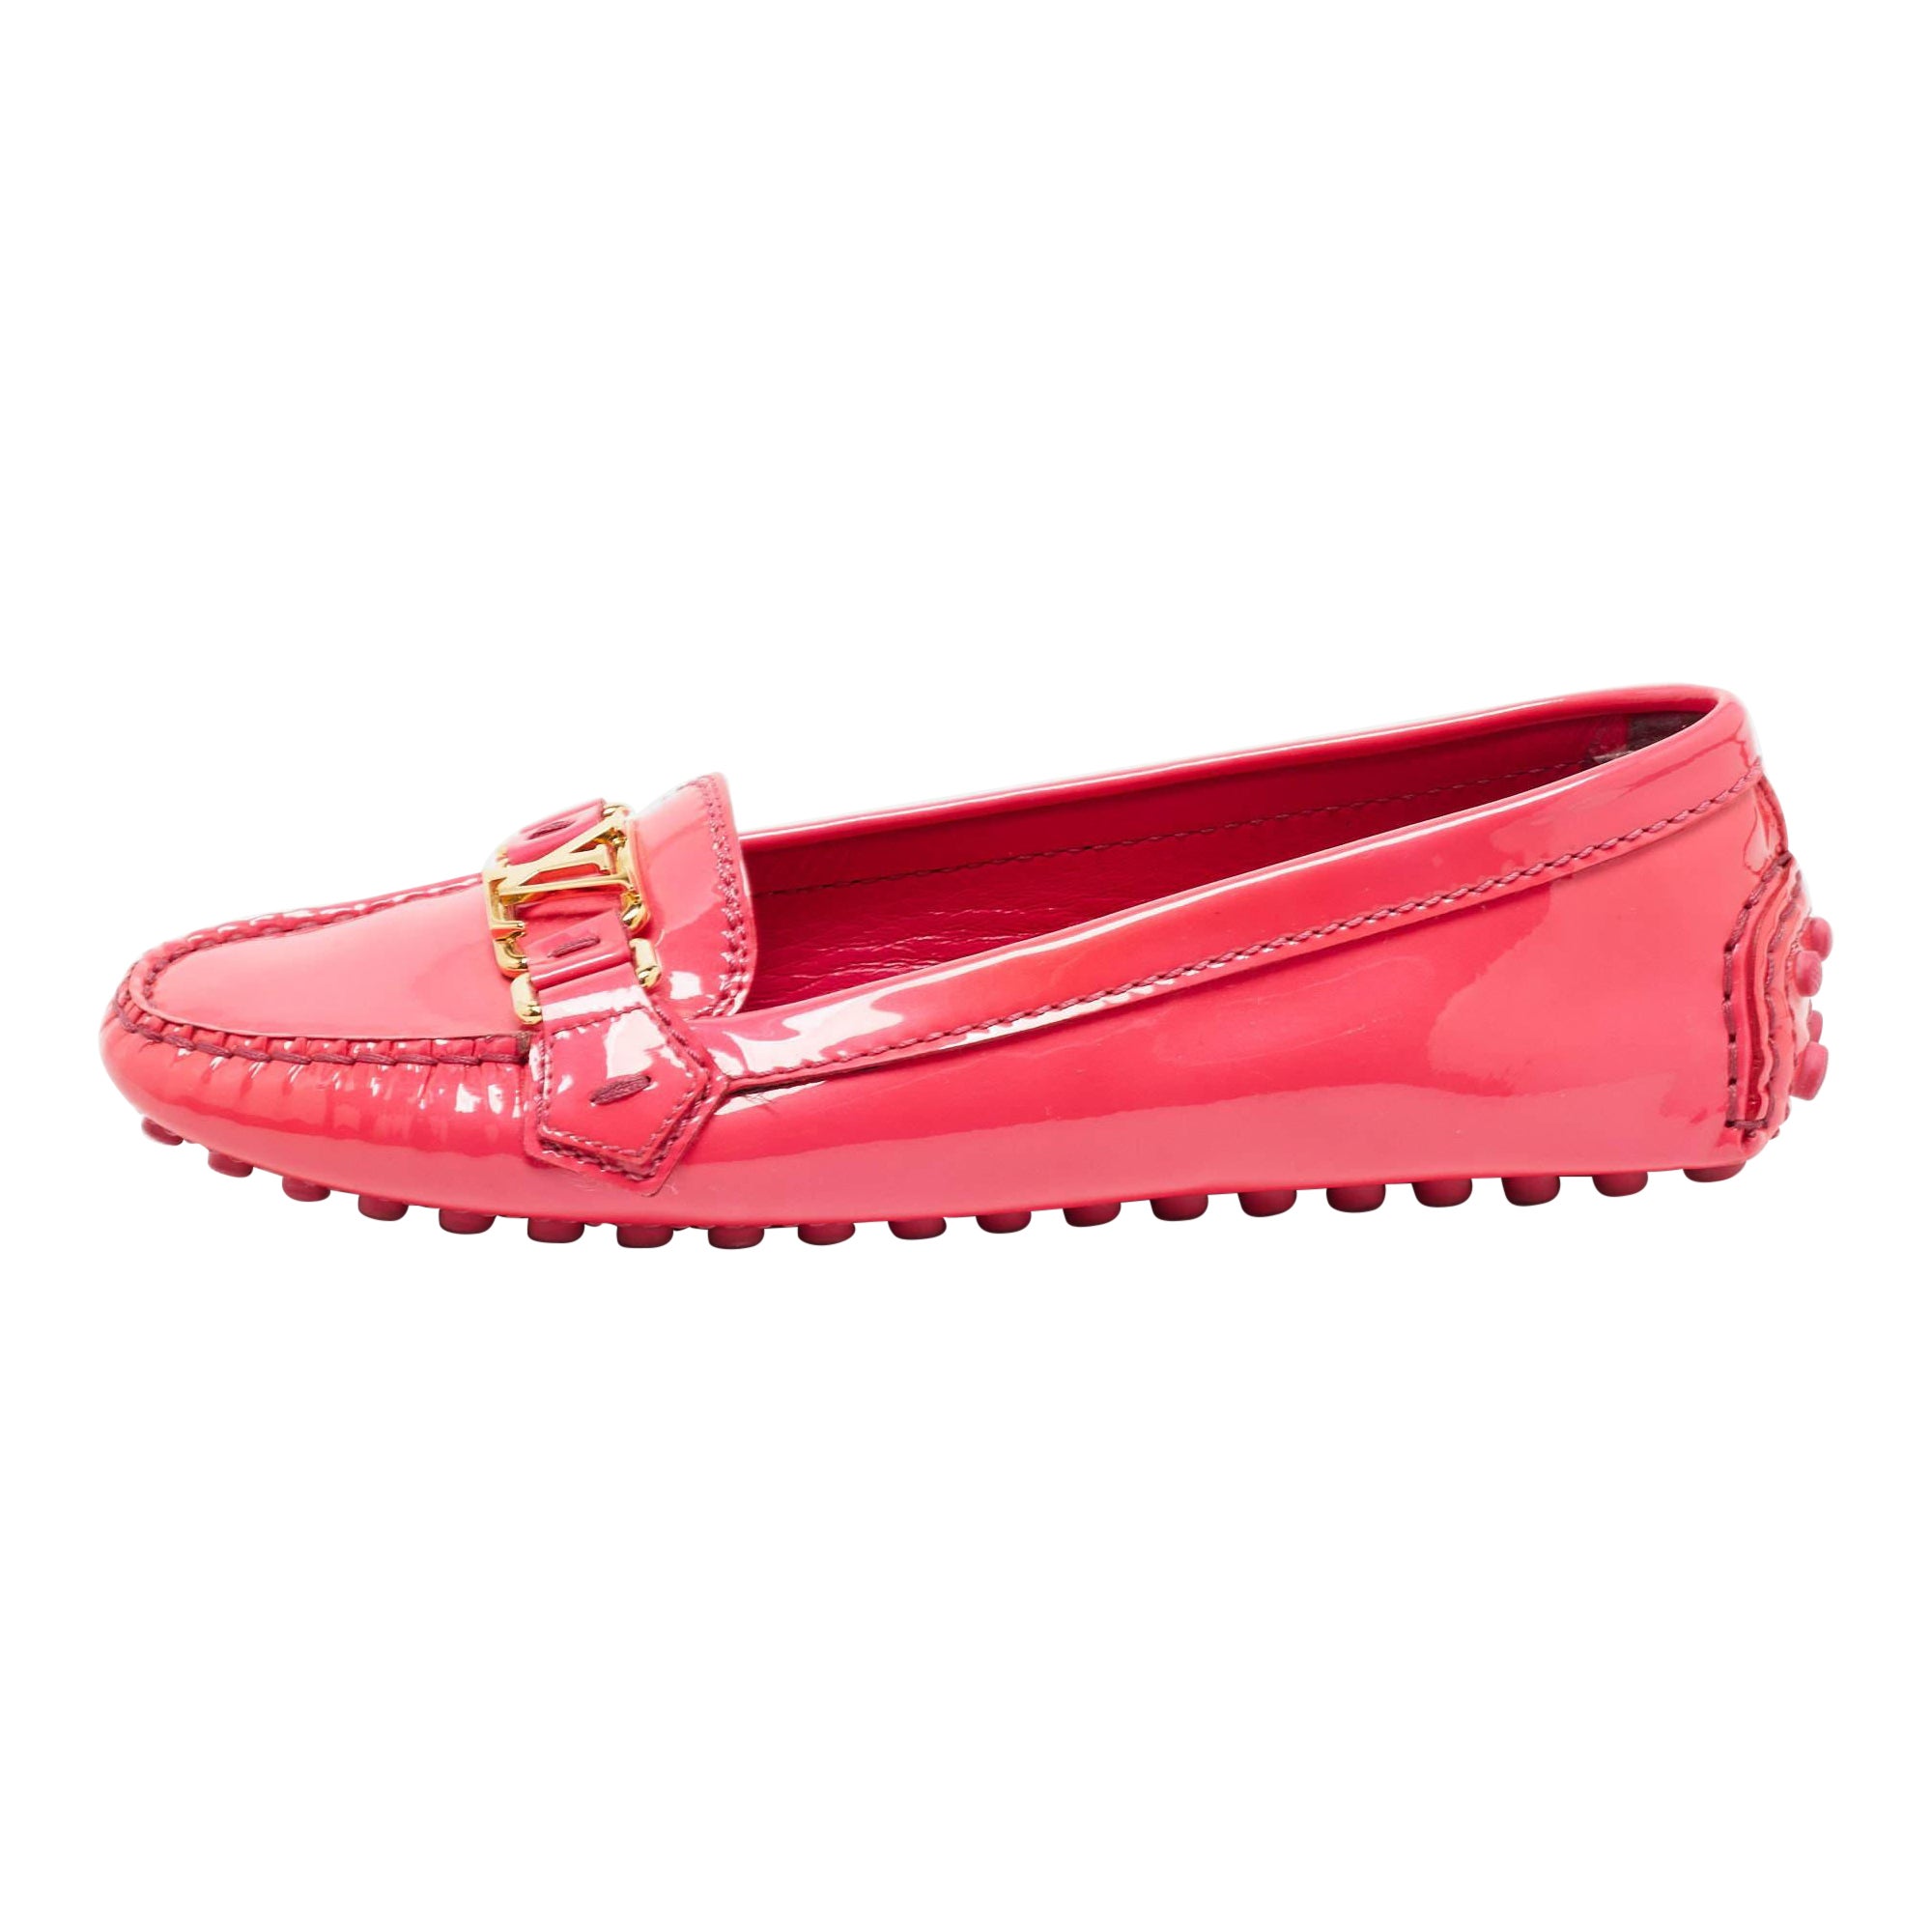 Louis Vuitton Pink Patent Leather Oxford Loafers Size 38